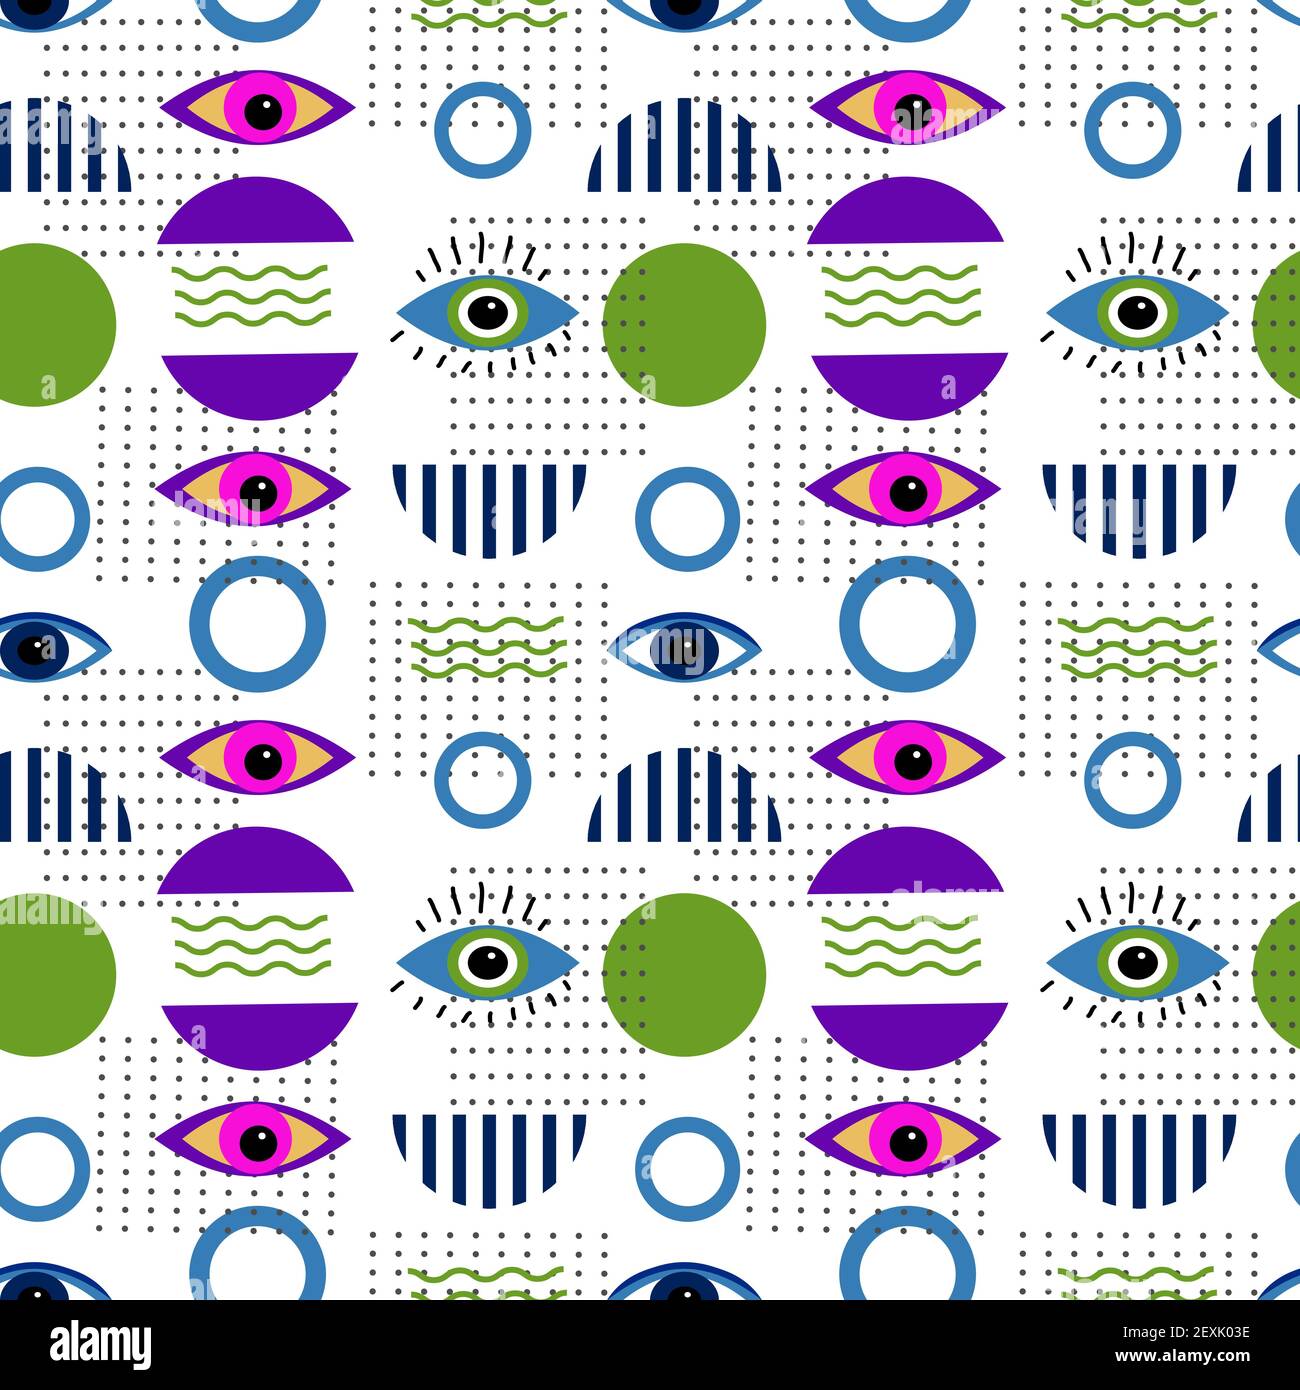 Pattern with eyes and abstract shapes. Stock Vector